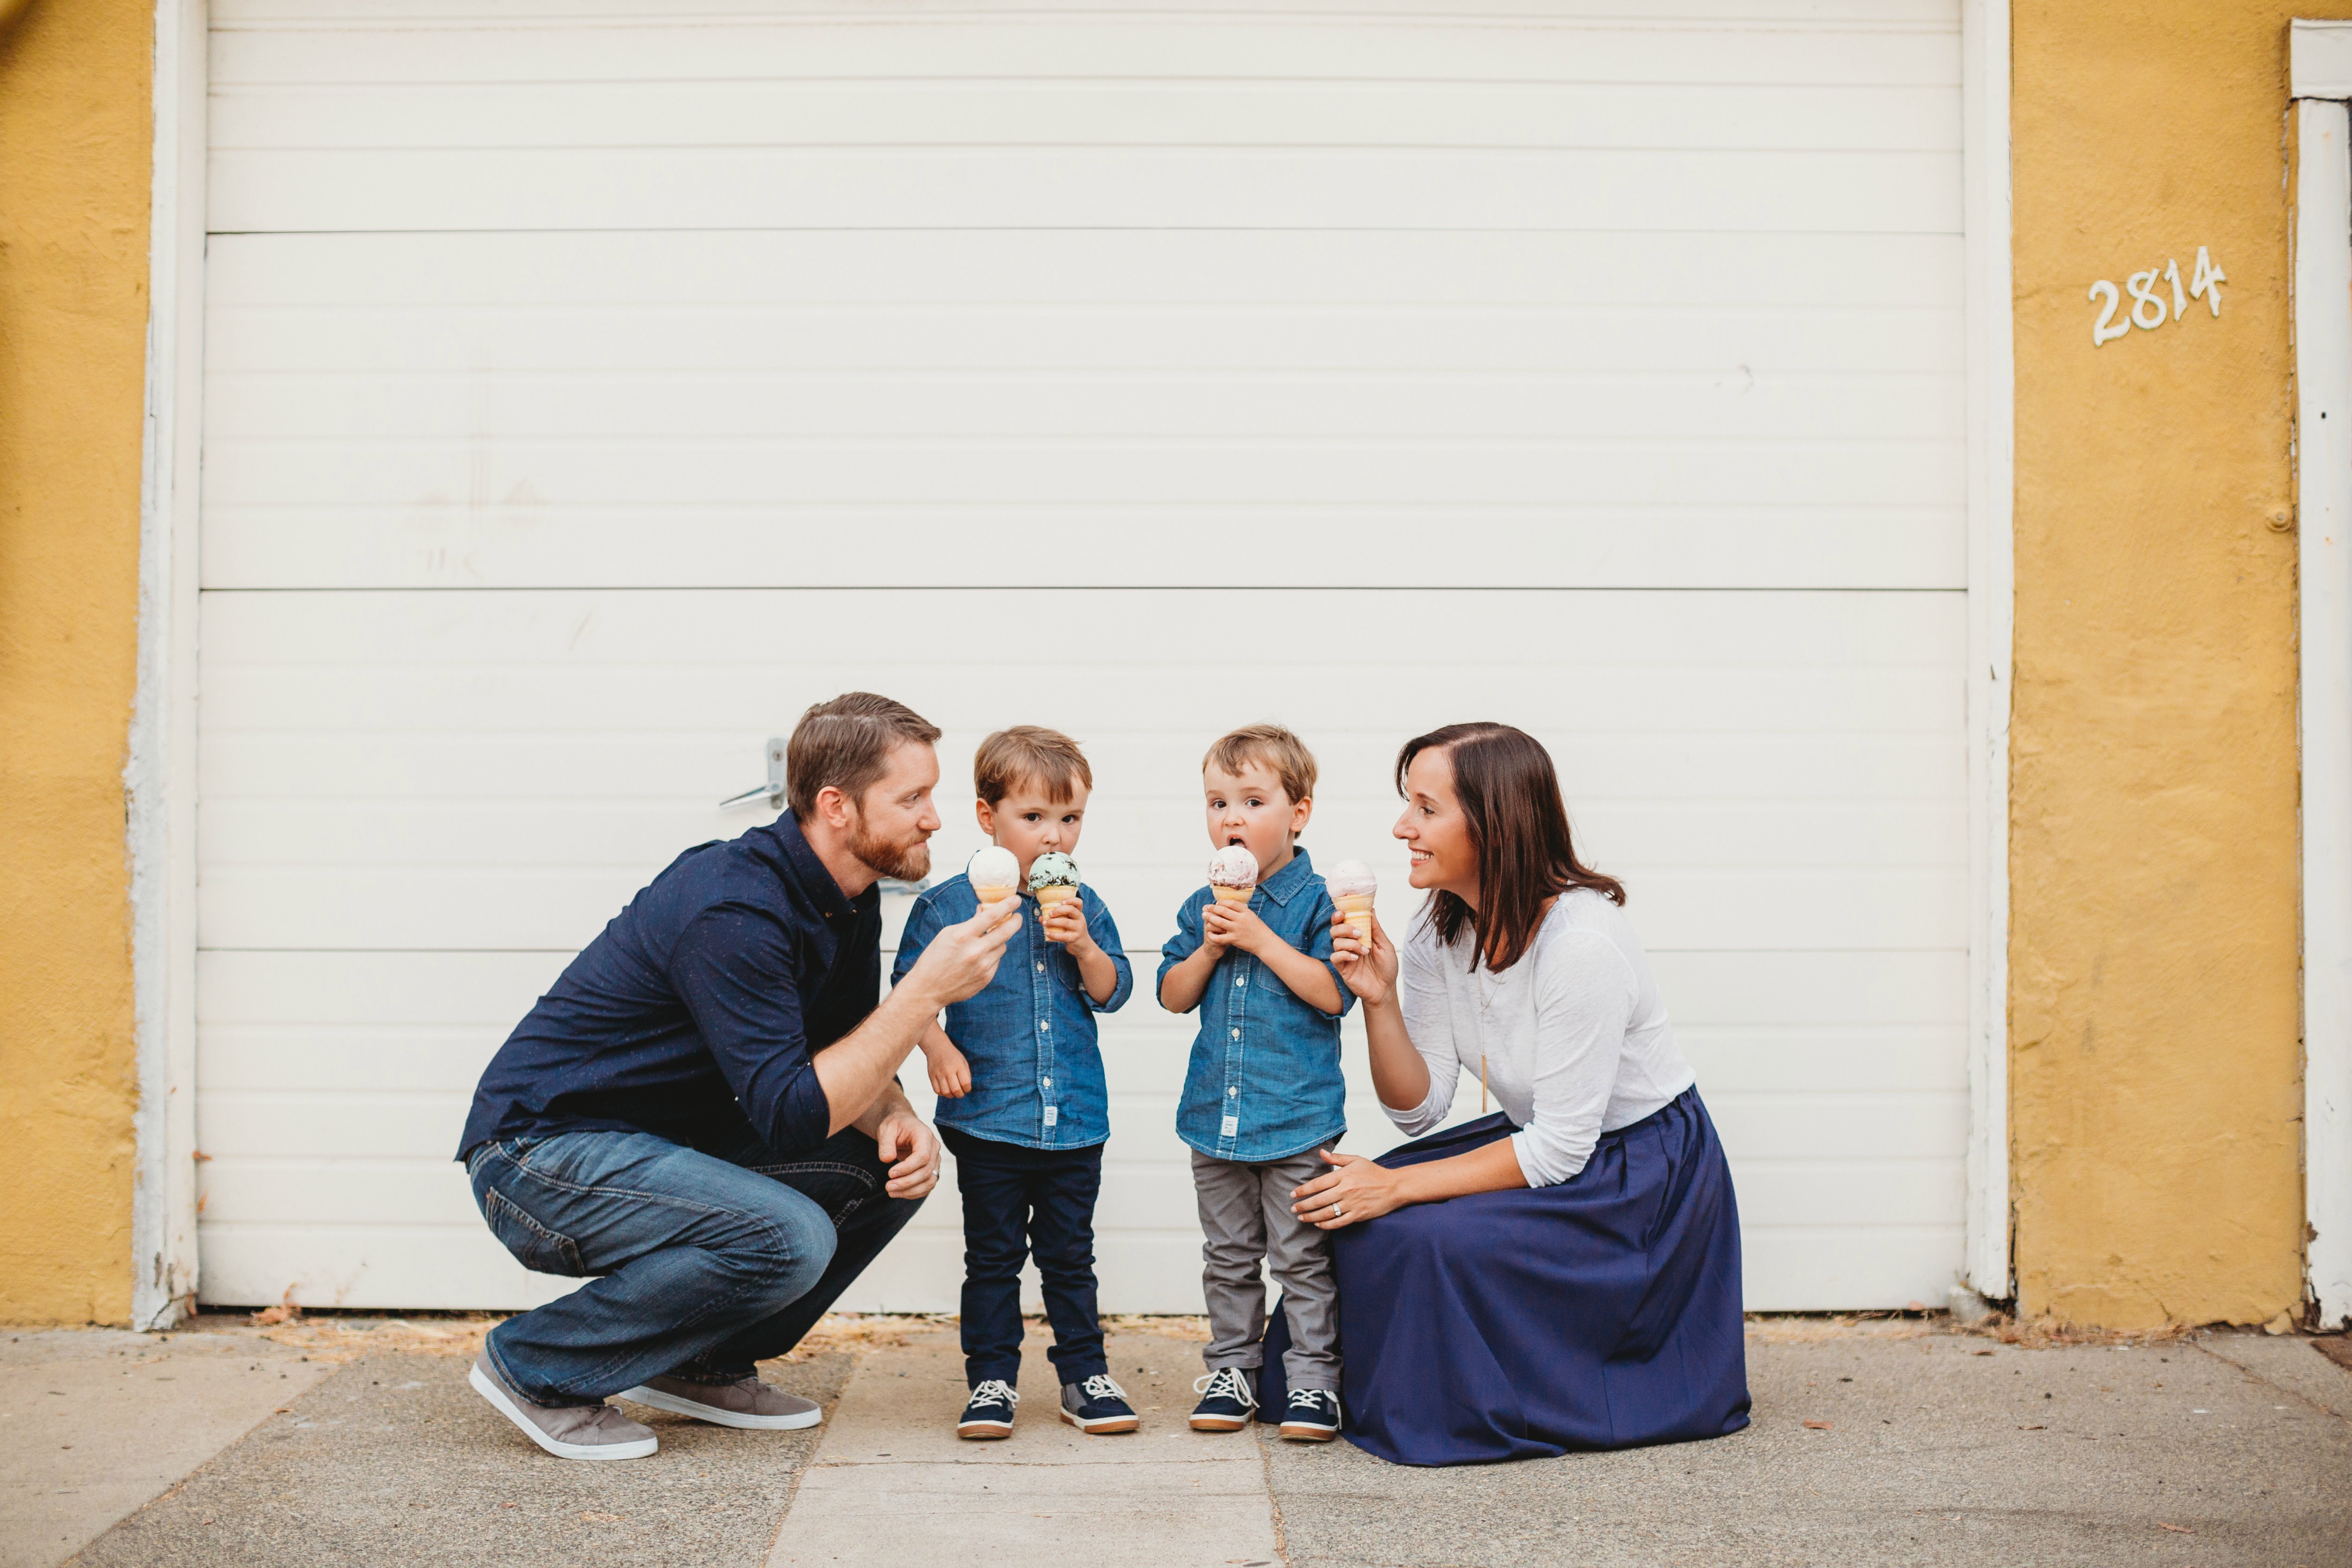 Cori, with her two little boys and her husband all eating ice cream cones in front of a white garage door